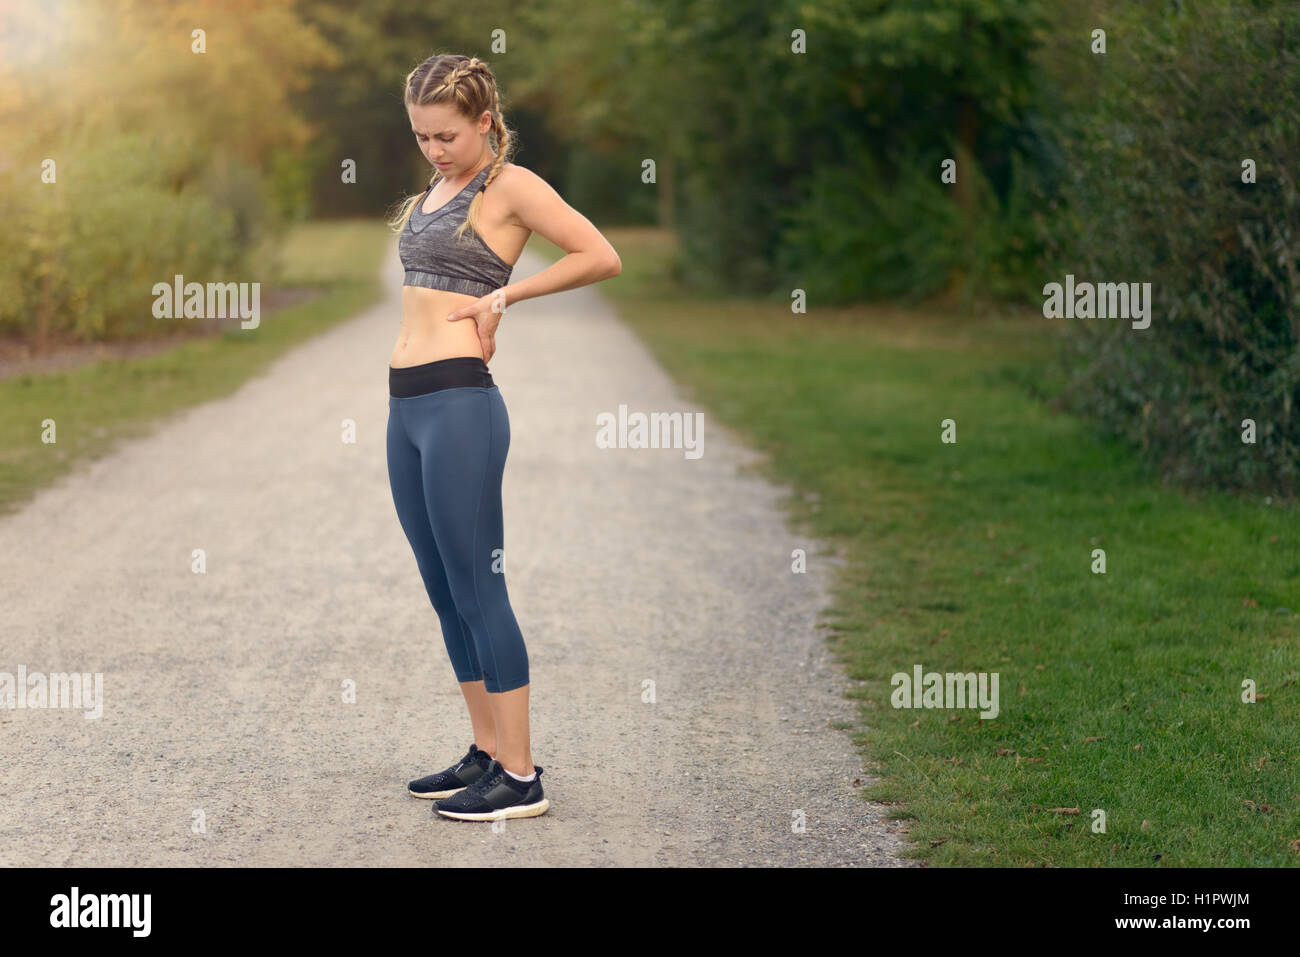 Woman athlete pausing to relieve her back pain holding her hand to her lower back with a grimace while out training in the count Stock Photo